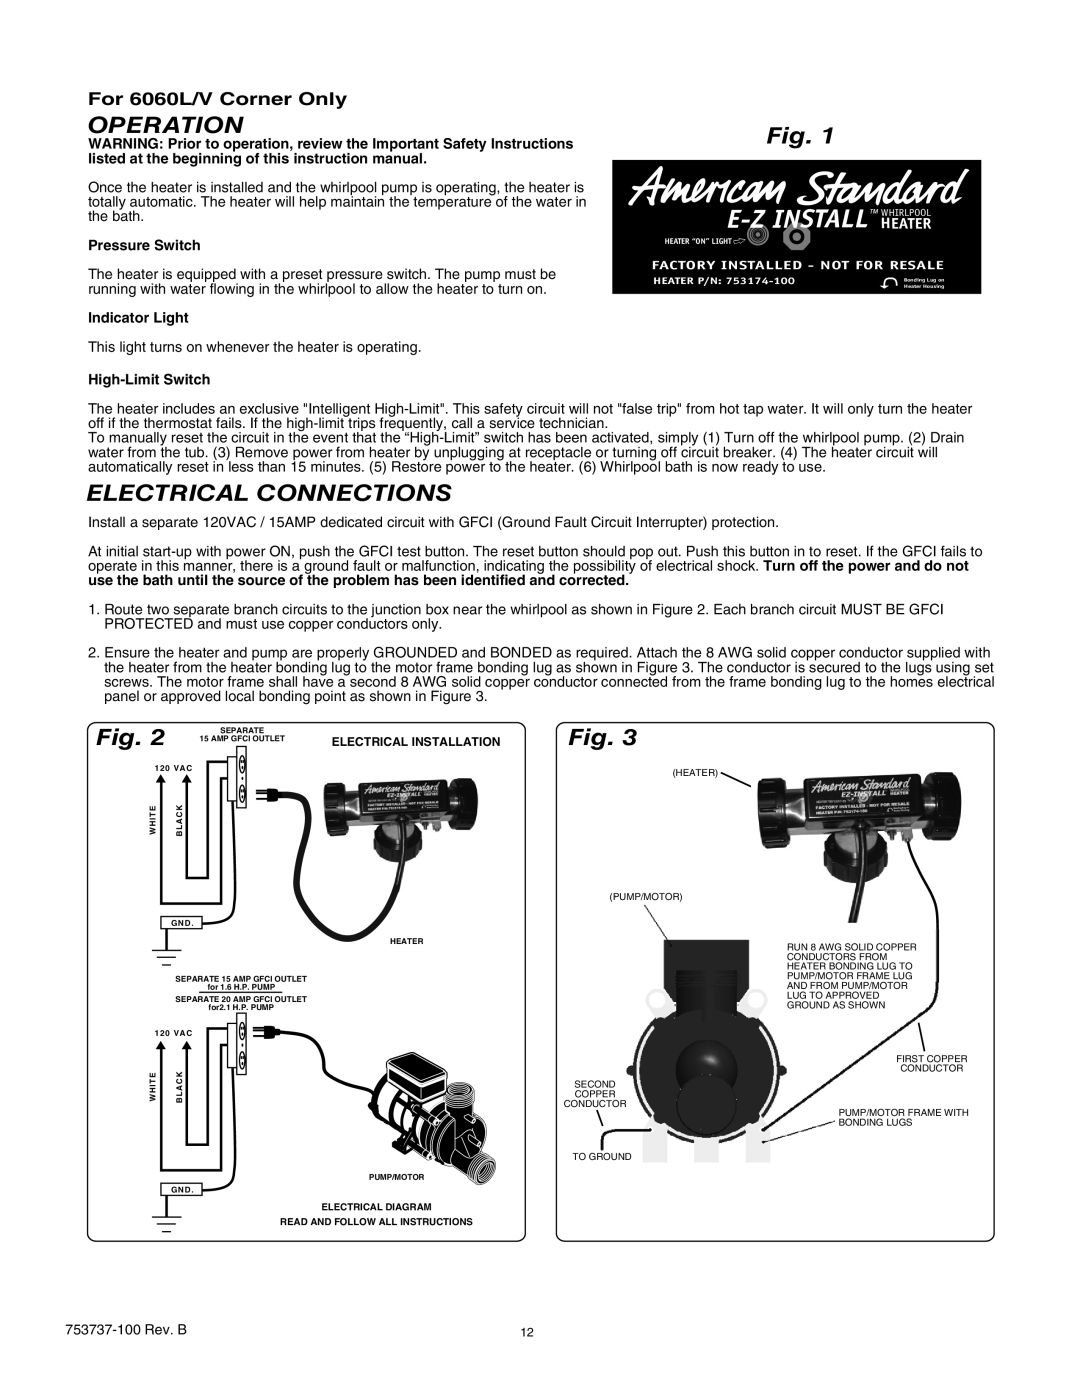 American Standard 2771VA manual E-Z Install, Operation, Electrical Connections, Pressure Switch, Indicator Light 